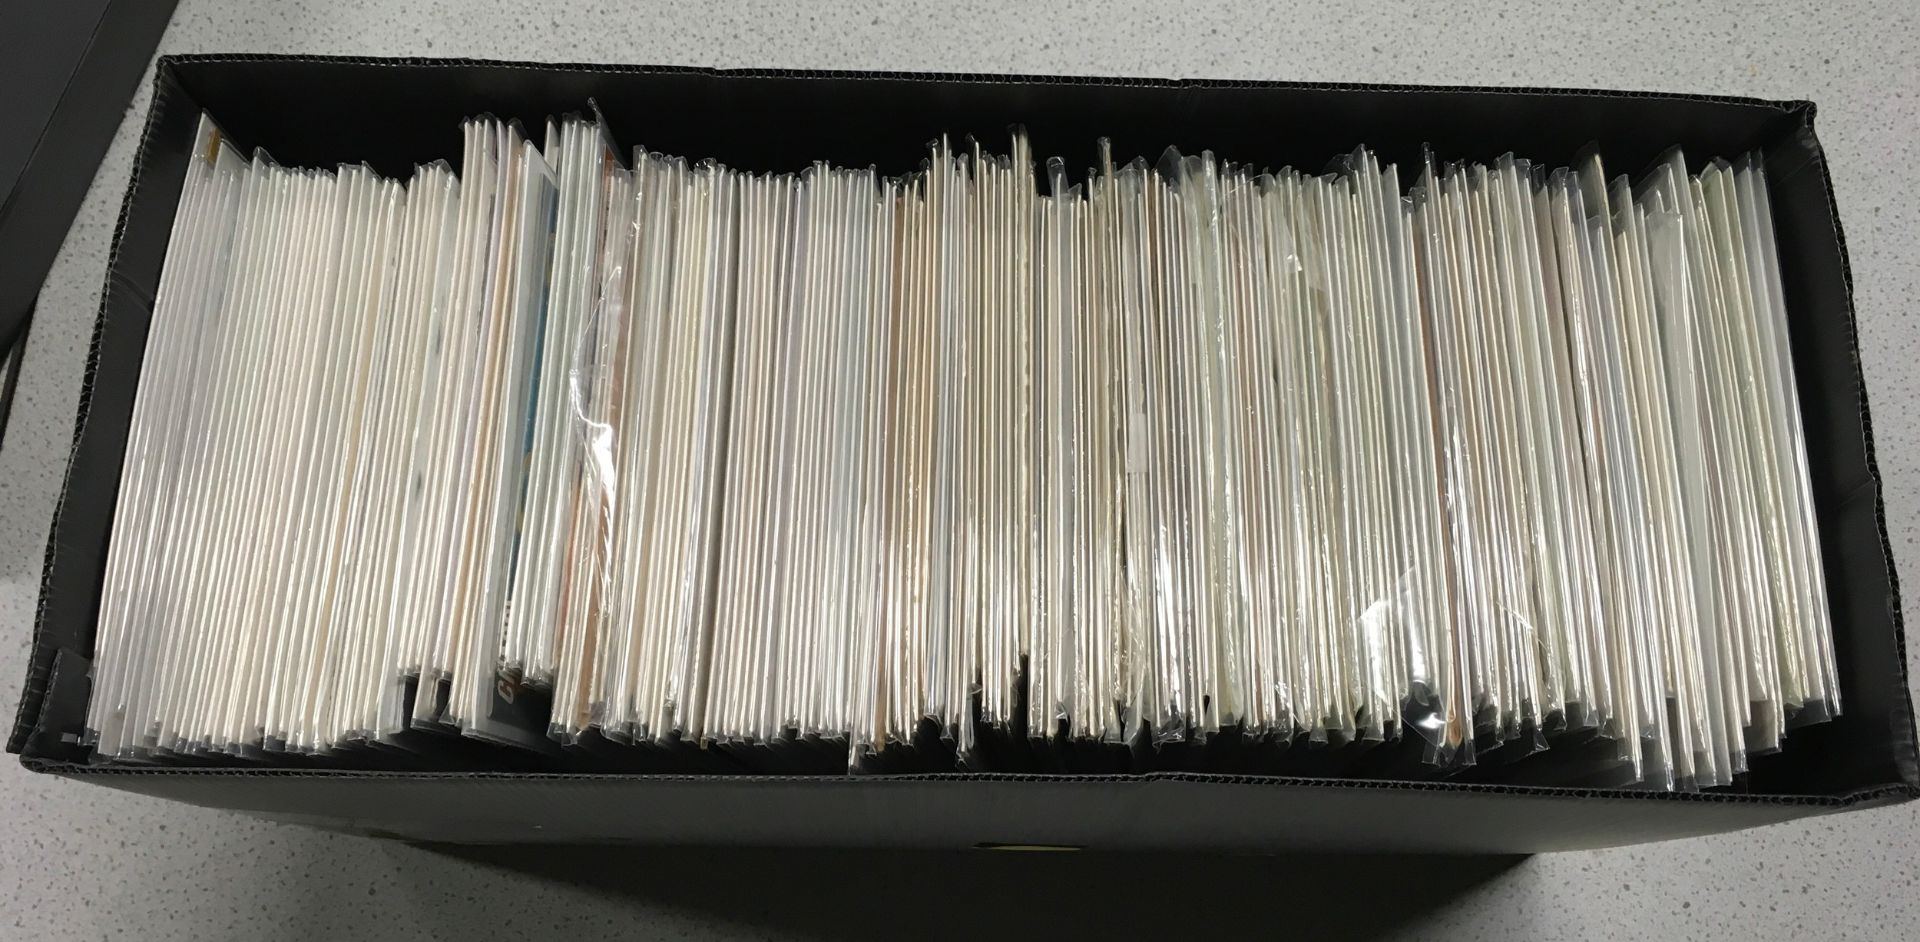 Approx 200+ comics to include DC, Marvel and others (only an array of comics pictured). - Image 5 of 5